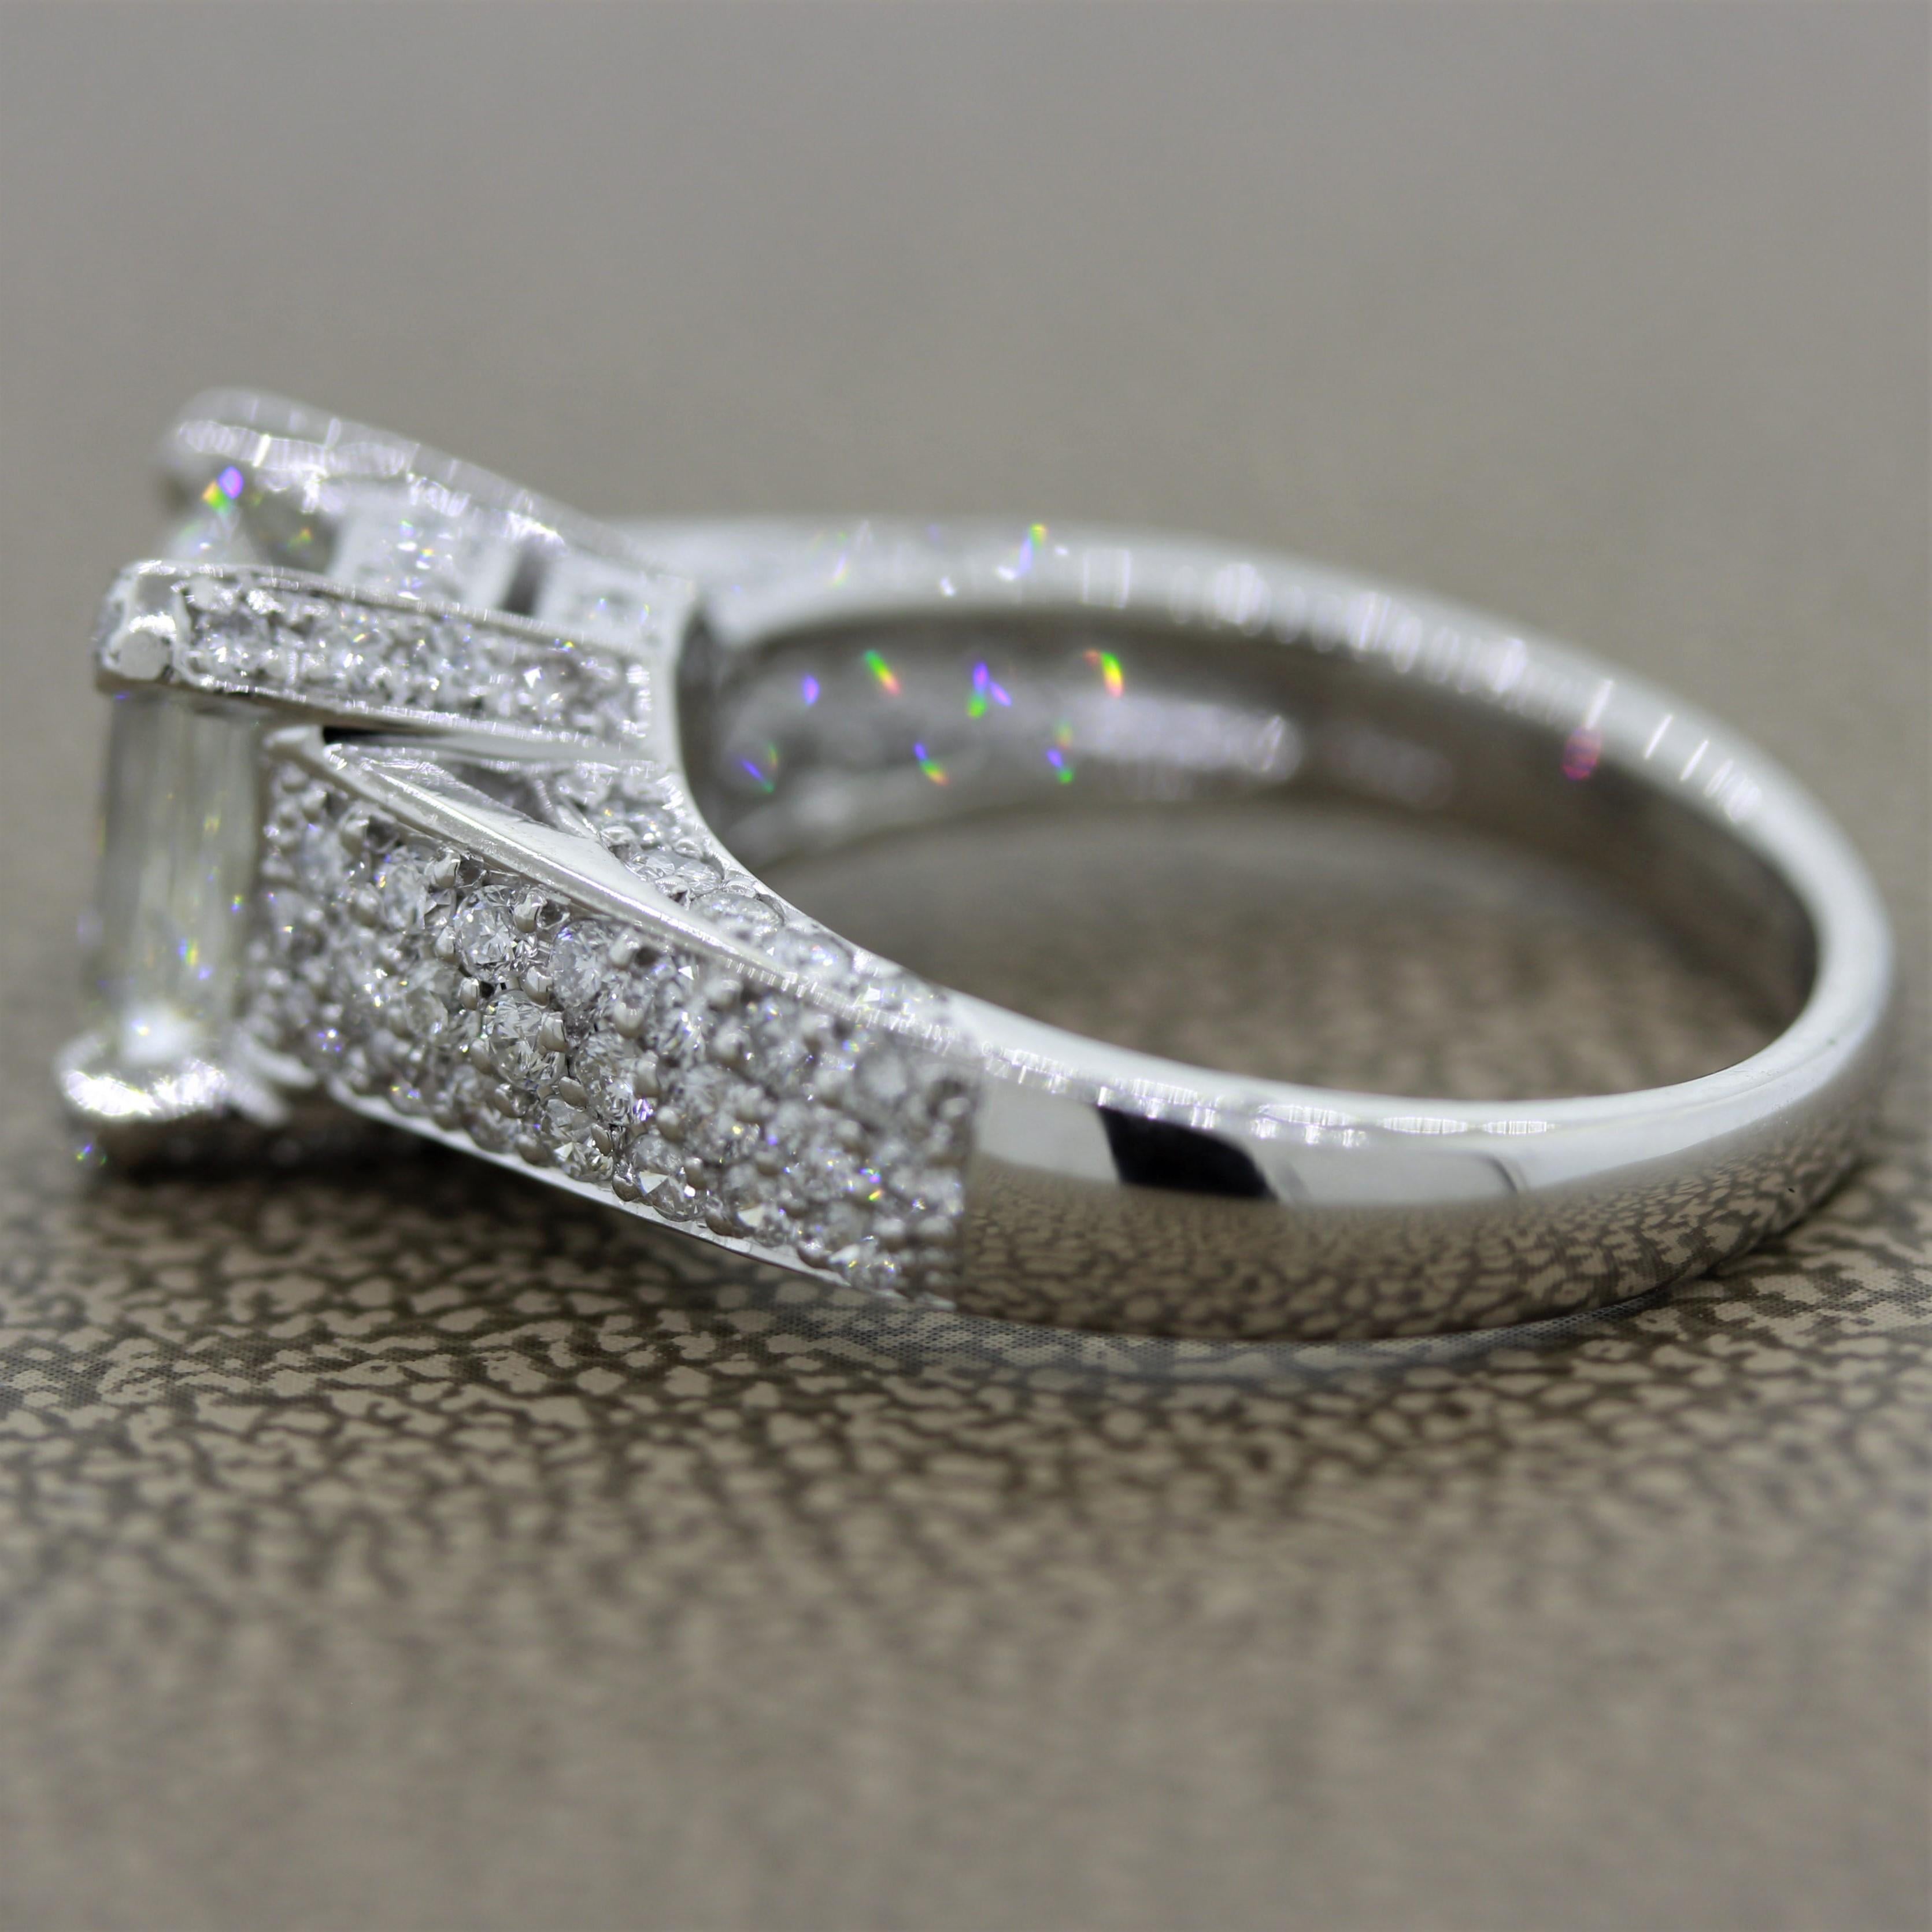 men's engagement ring in platinum with an emerald-cut diamond